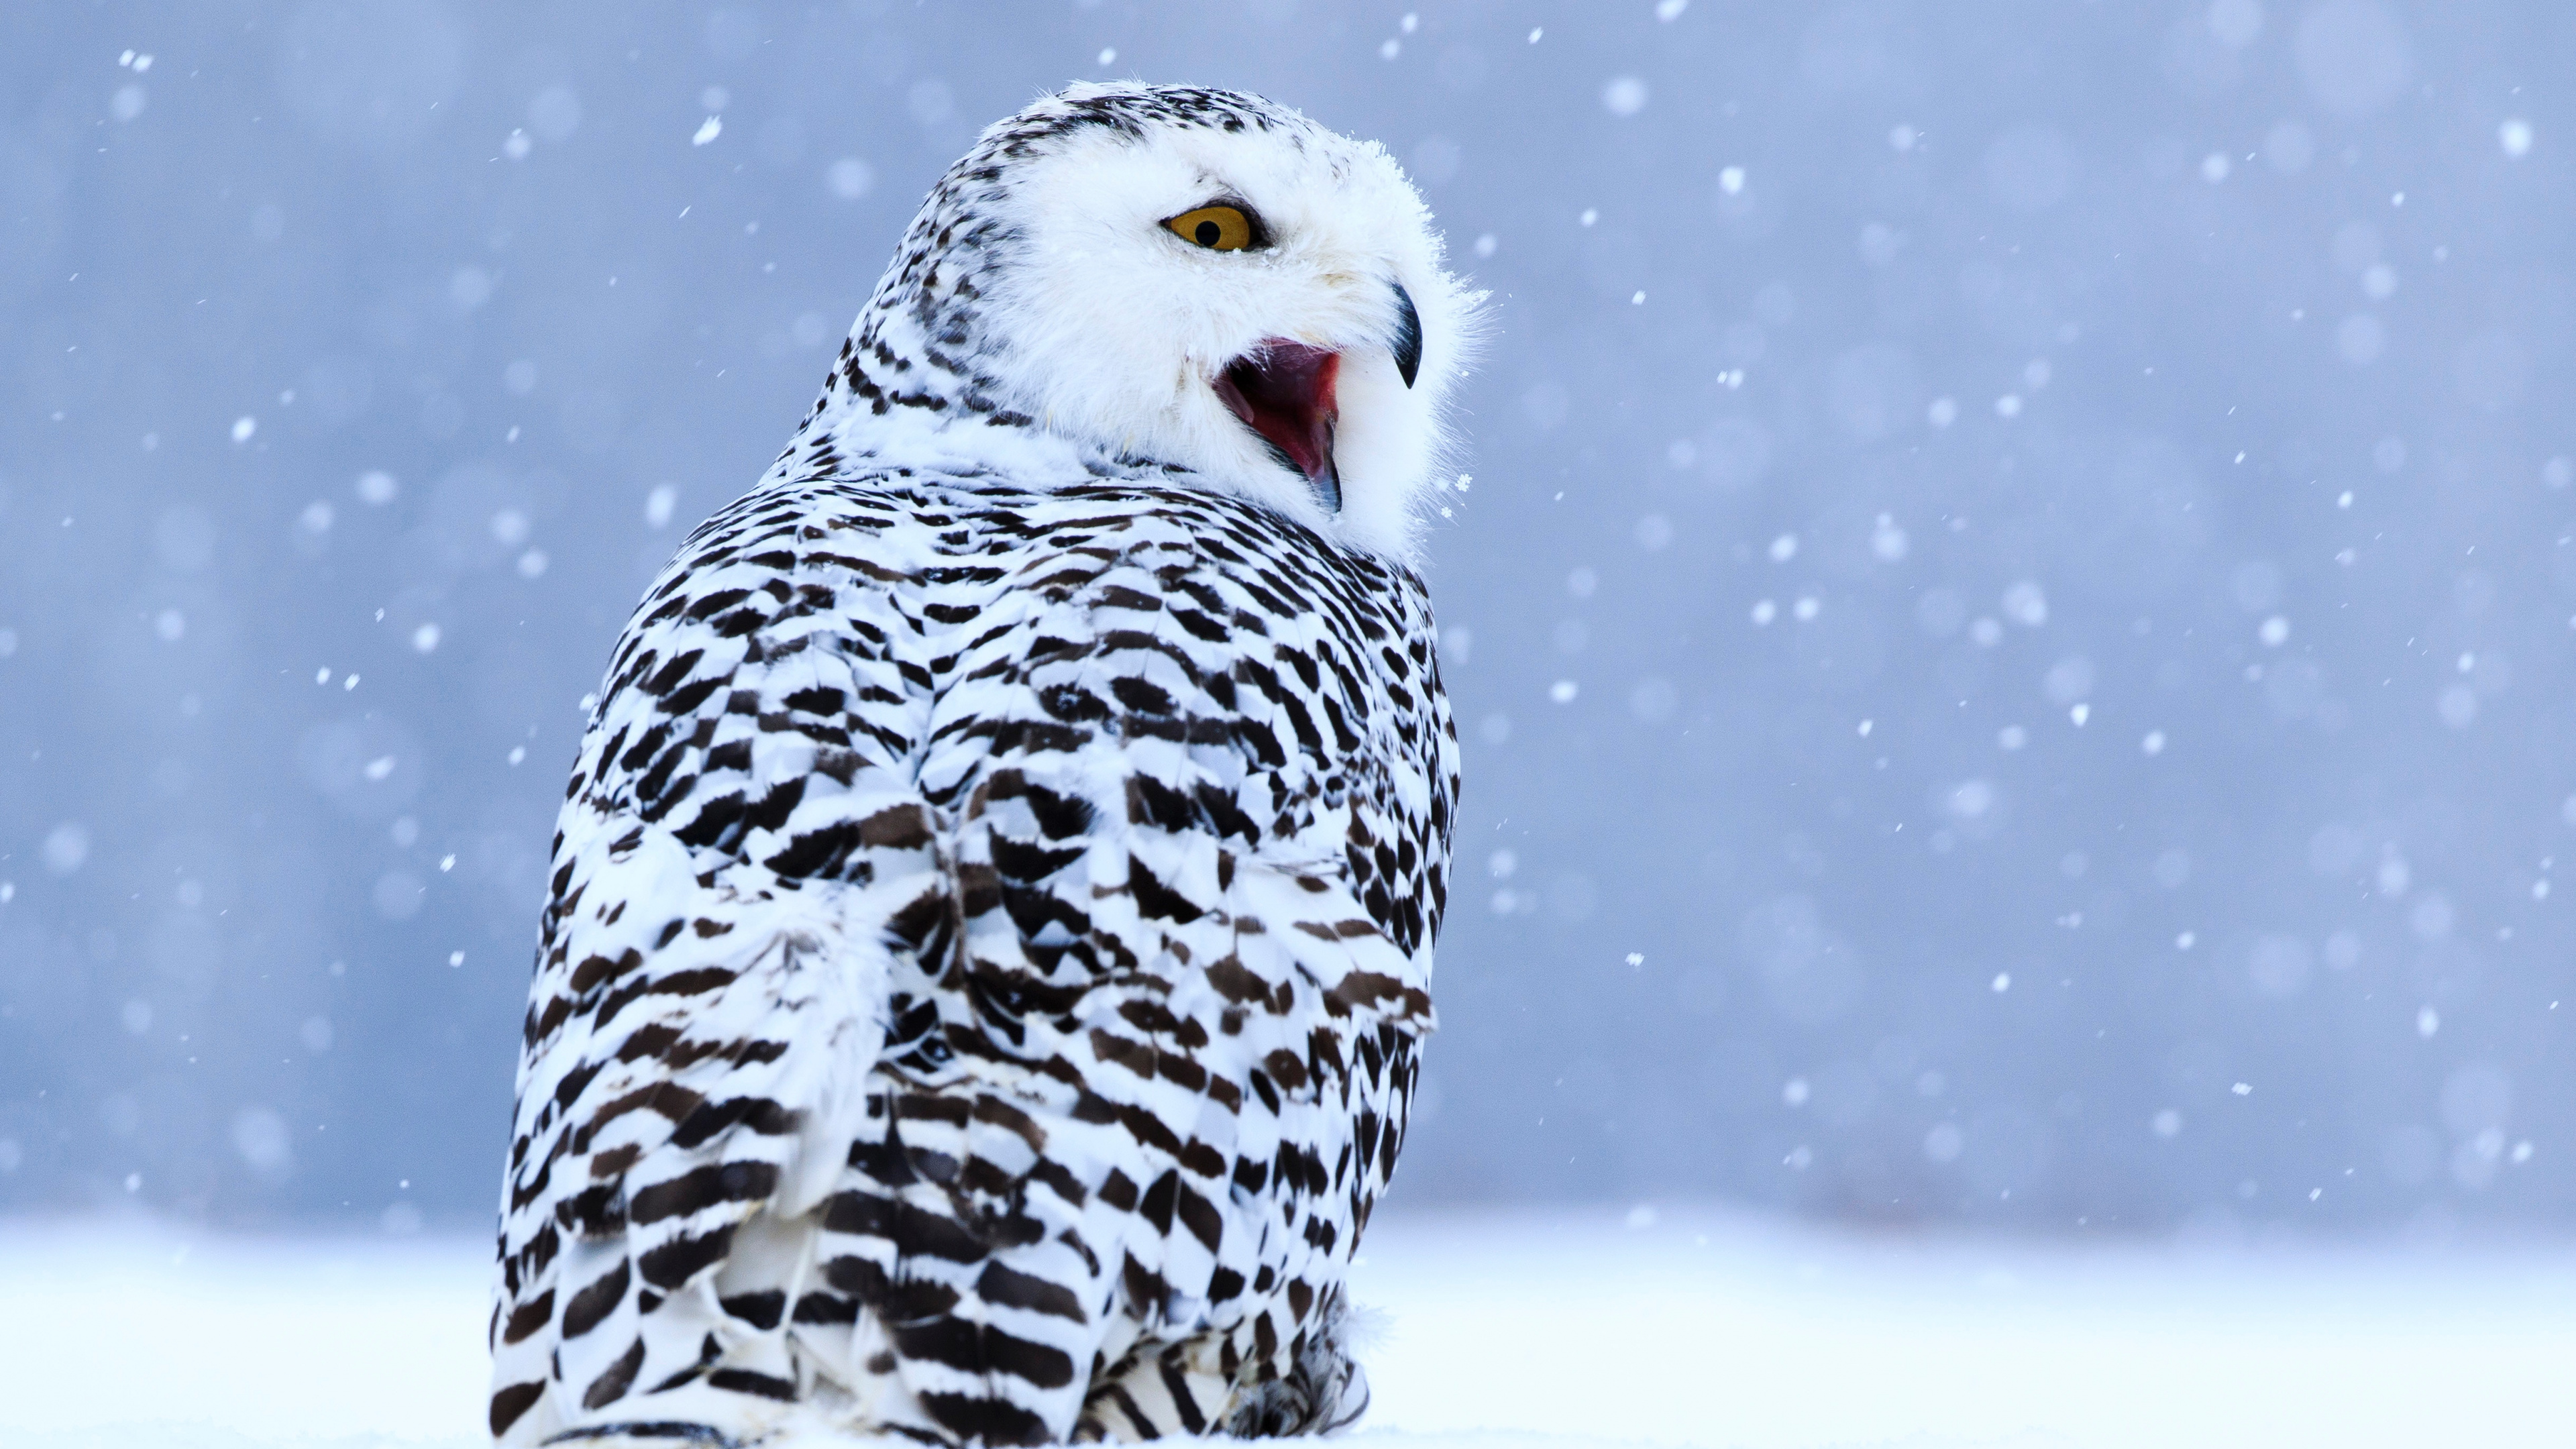 White and Black Owl on Snow Covered Ground During Daytime. Wallpaper in 3840x2160 Resolution